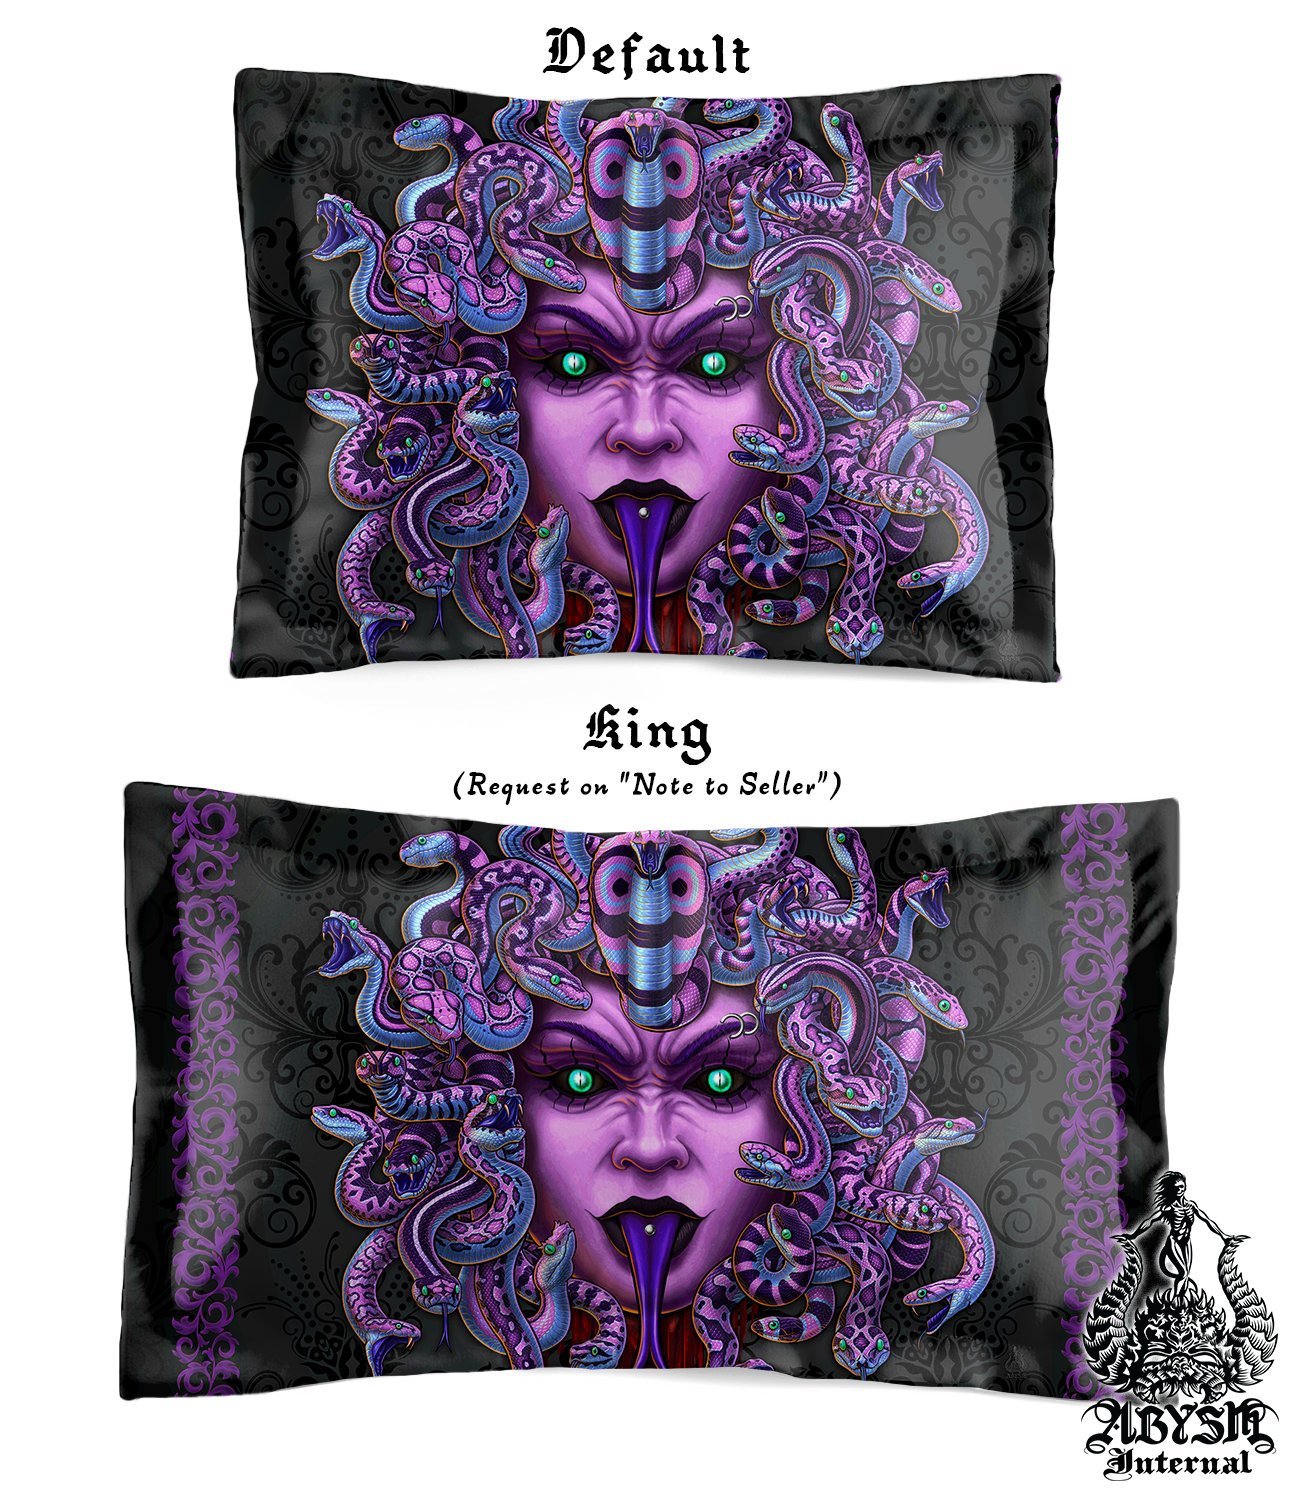 Pastel Goth Bedding Set, Comforter and Duvet, Gothic Bed Cover and Bedroom Decor, King, Queen and Twin Size - Black and Purple Medusa, - Abysm Internal